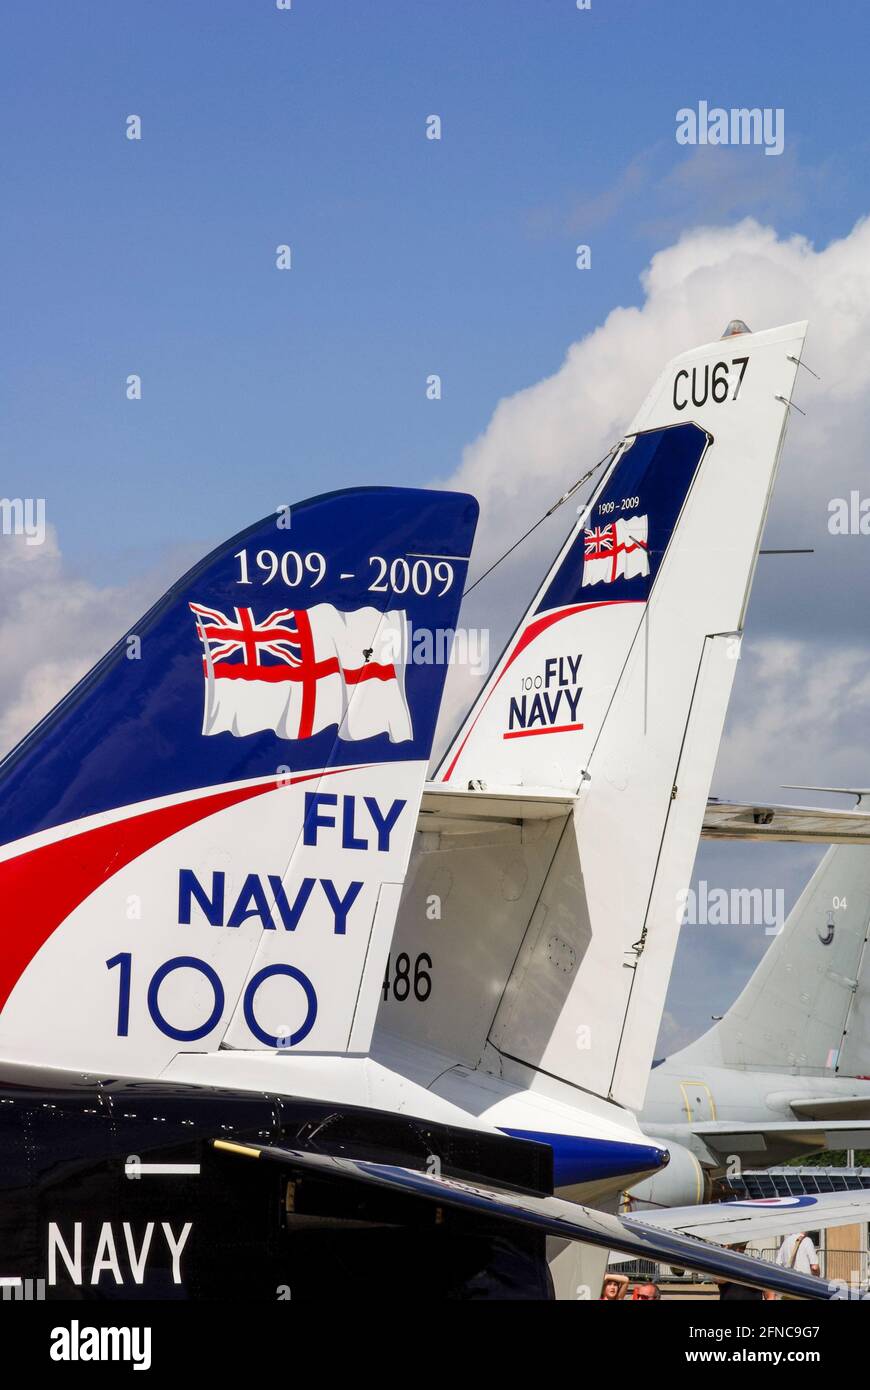 British Aerospace BAe Hawk T1 jet trainer plane with special Fleet Air Arm, Royal Navy centenary, 100 years of naval aviation, Fly Navy 100 scheme Stock Photo